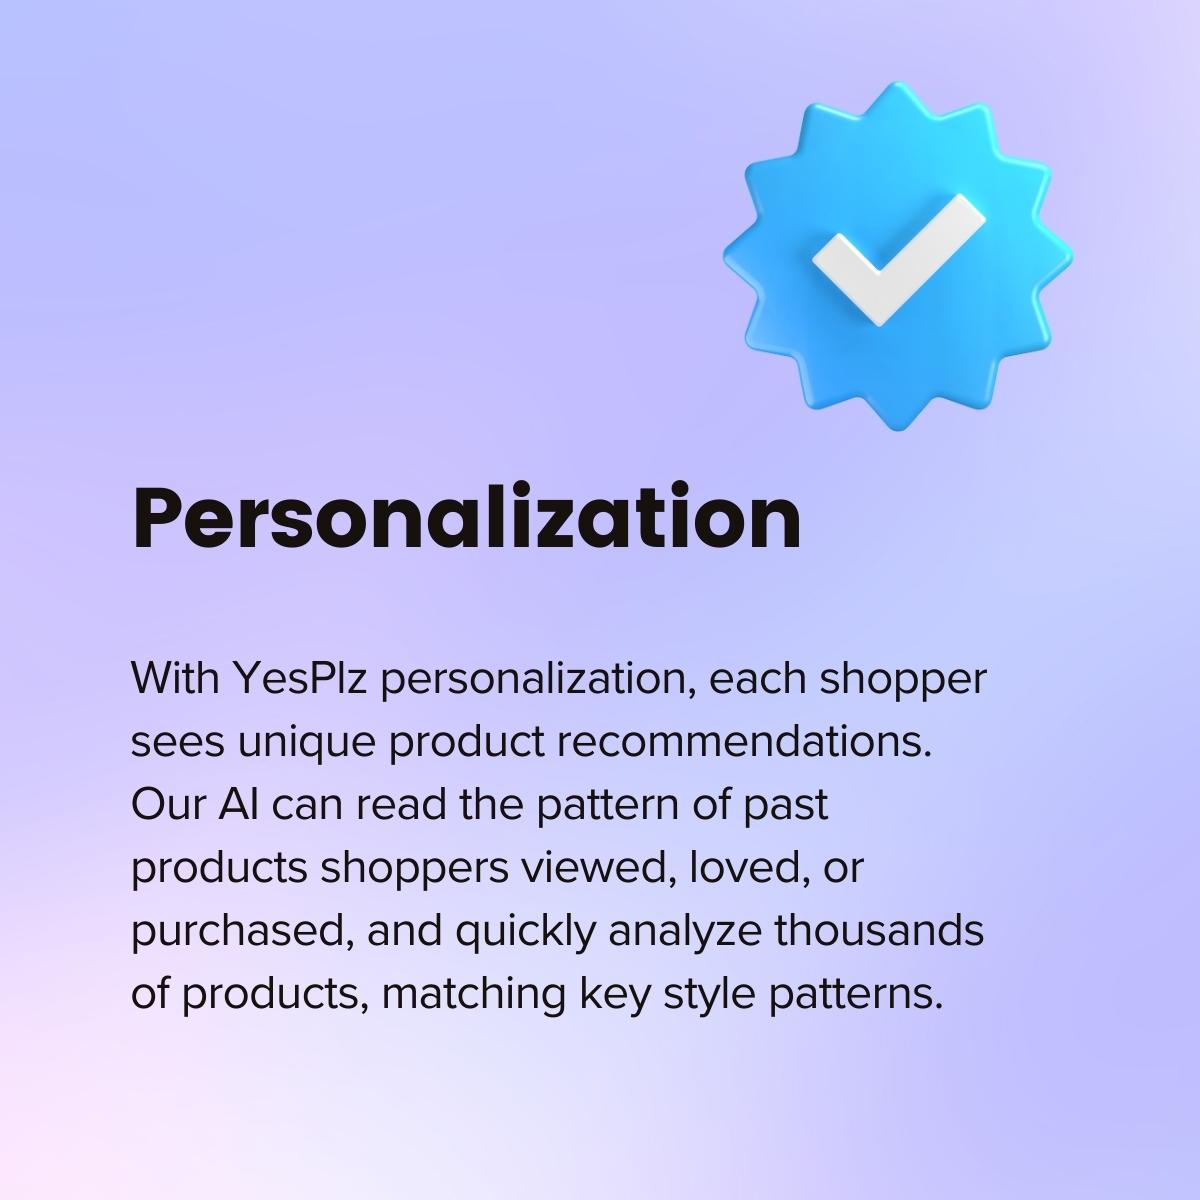 YesPlz personalization ecommerce recommendations explanation against a purple gradient background